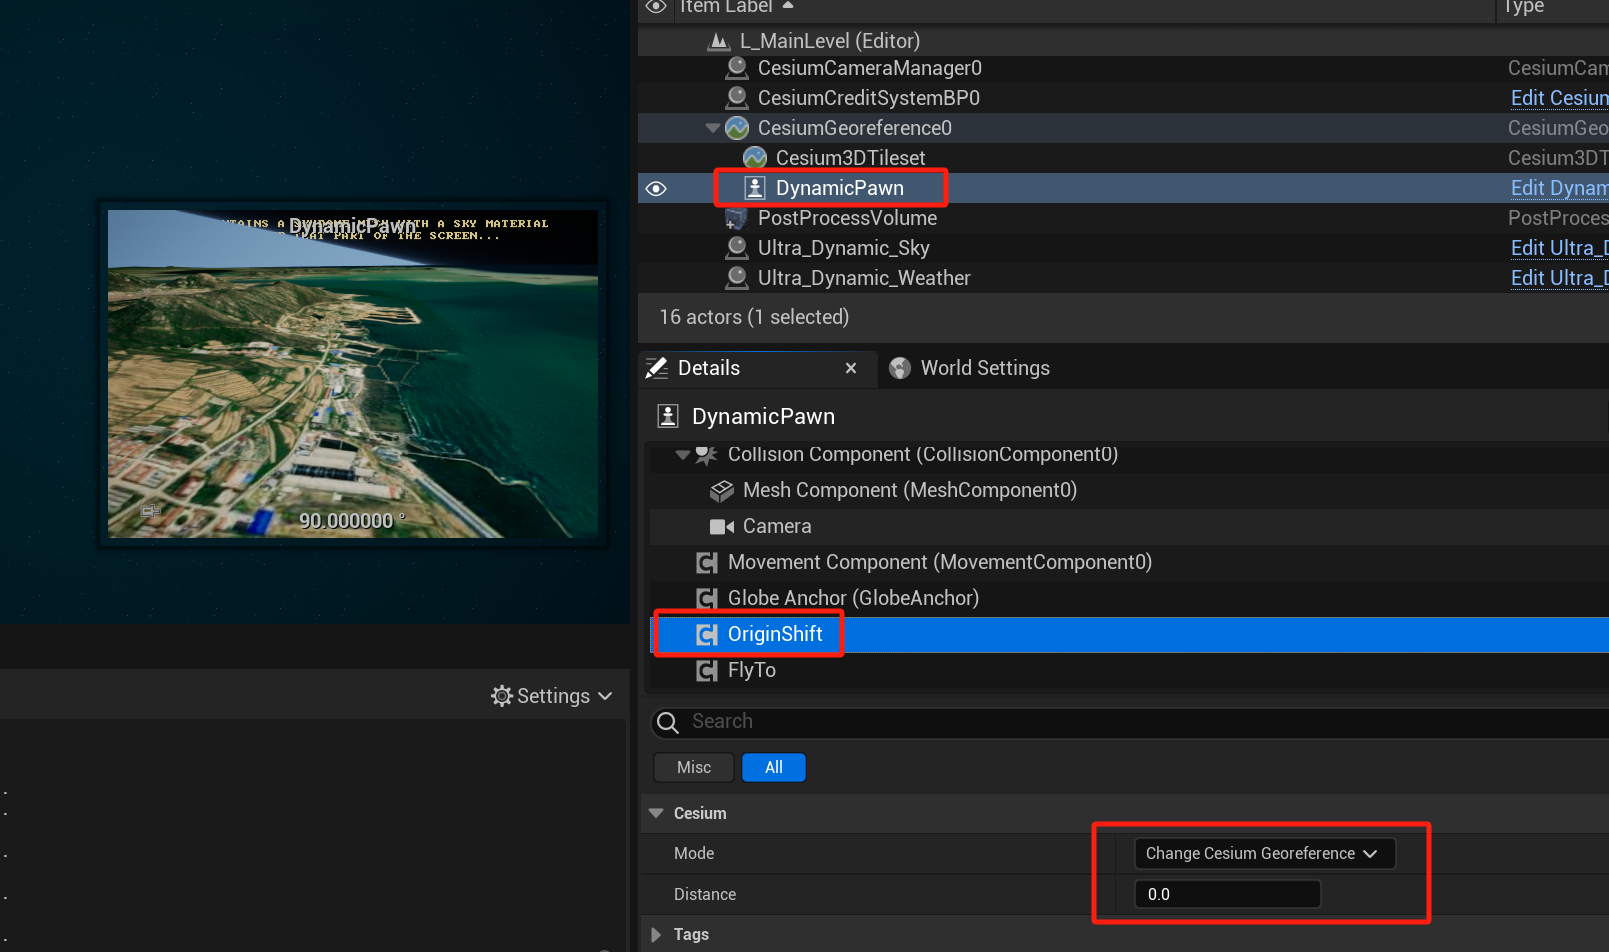 Cesium for unreal 让CesiumGeoreference的经纬度坐标跟随DynamicPawn移动。